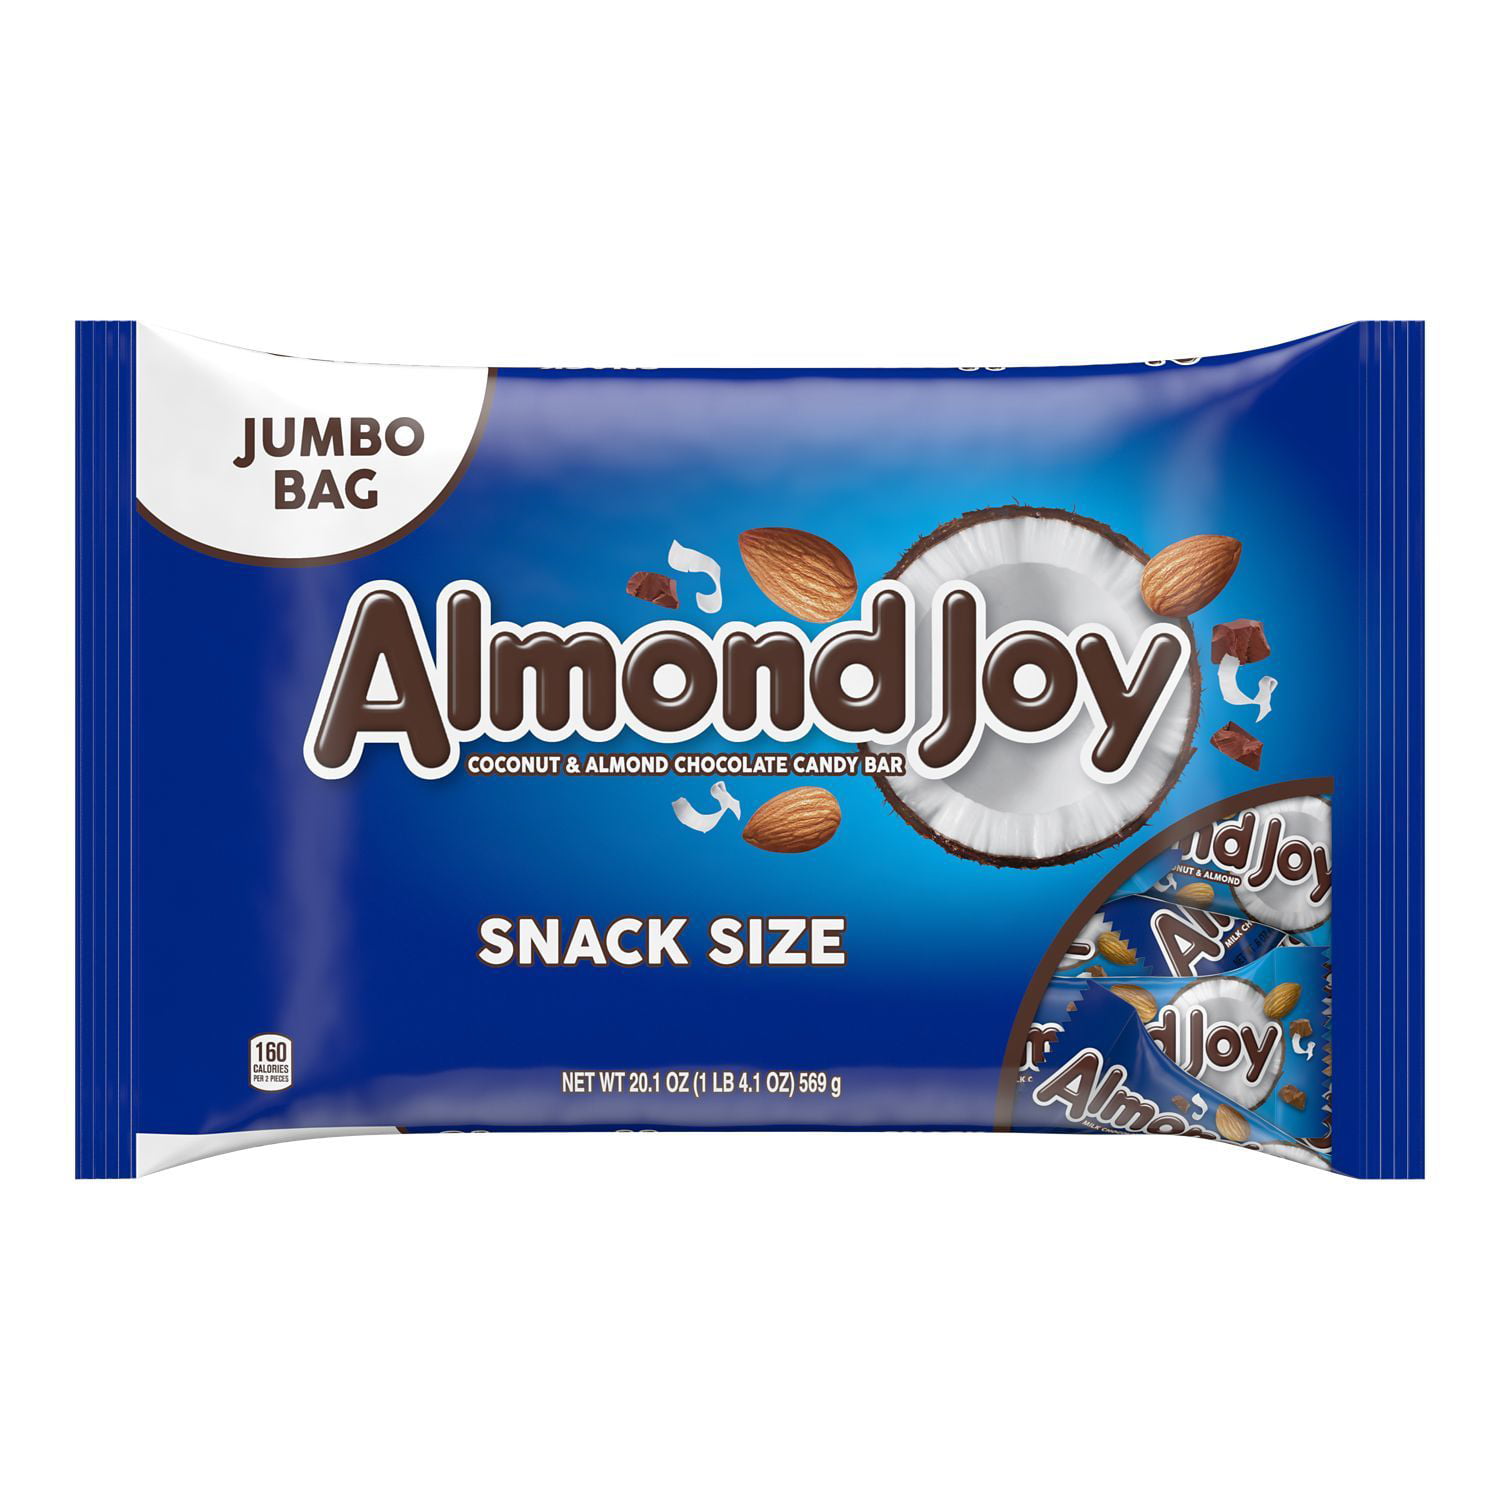 ALMOND JOY, Coconut and Almond Chocolate Snack Size Candy Bars, Gluten Free, Individually Wrapped, 20.1 oz, Jumbo Bag